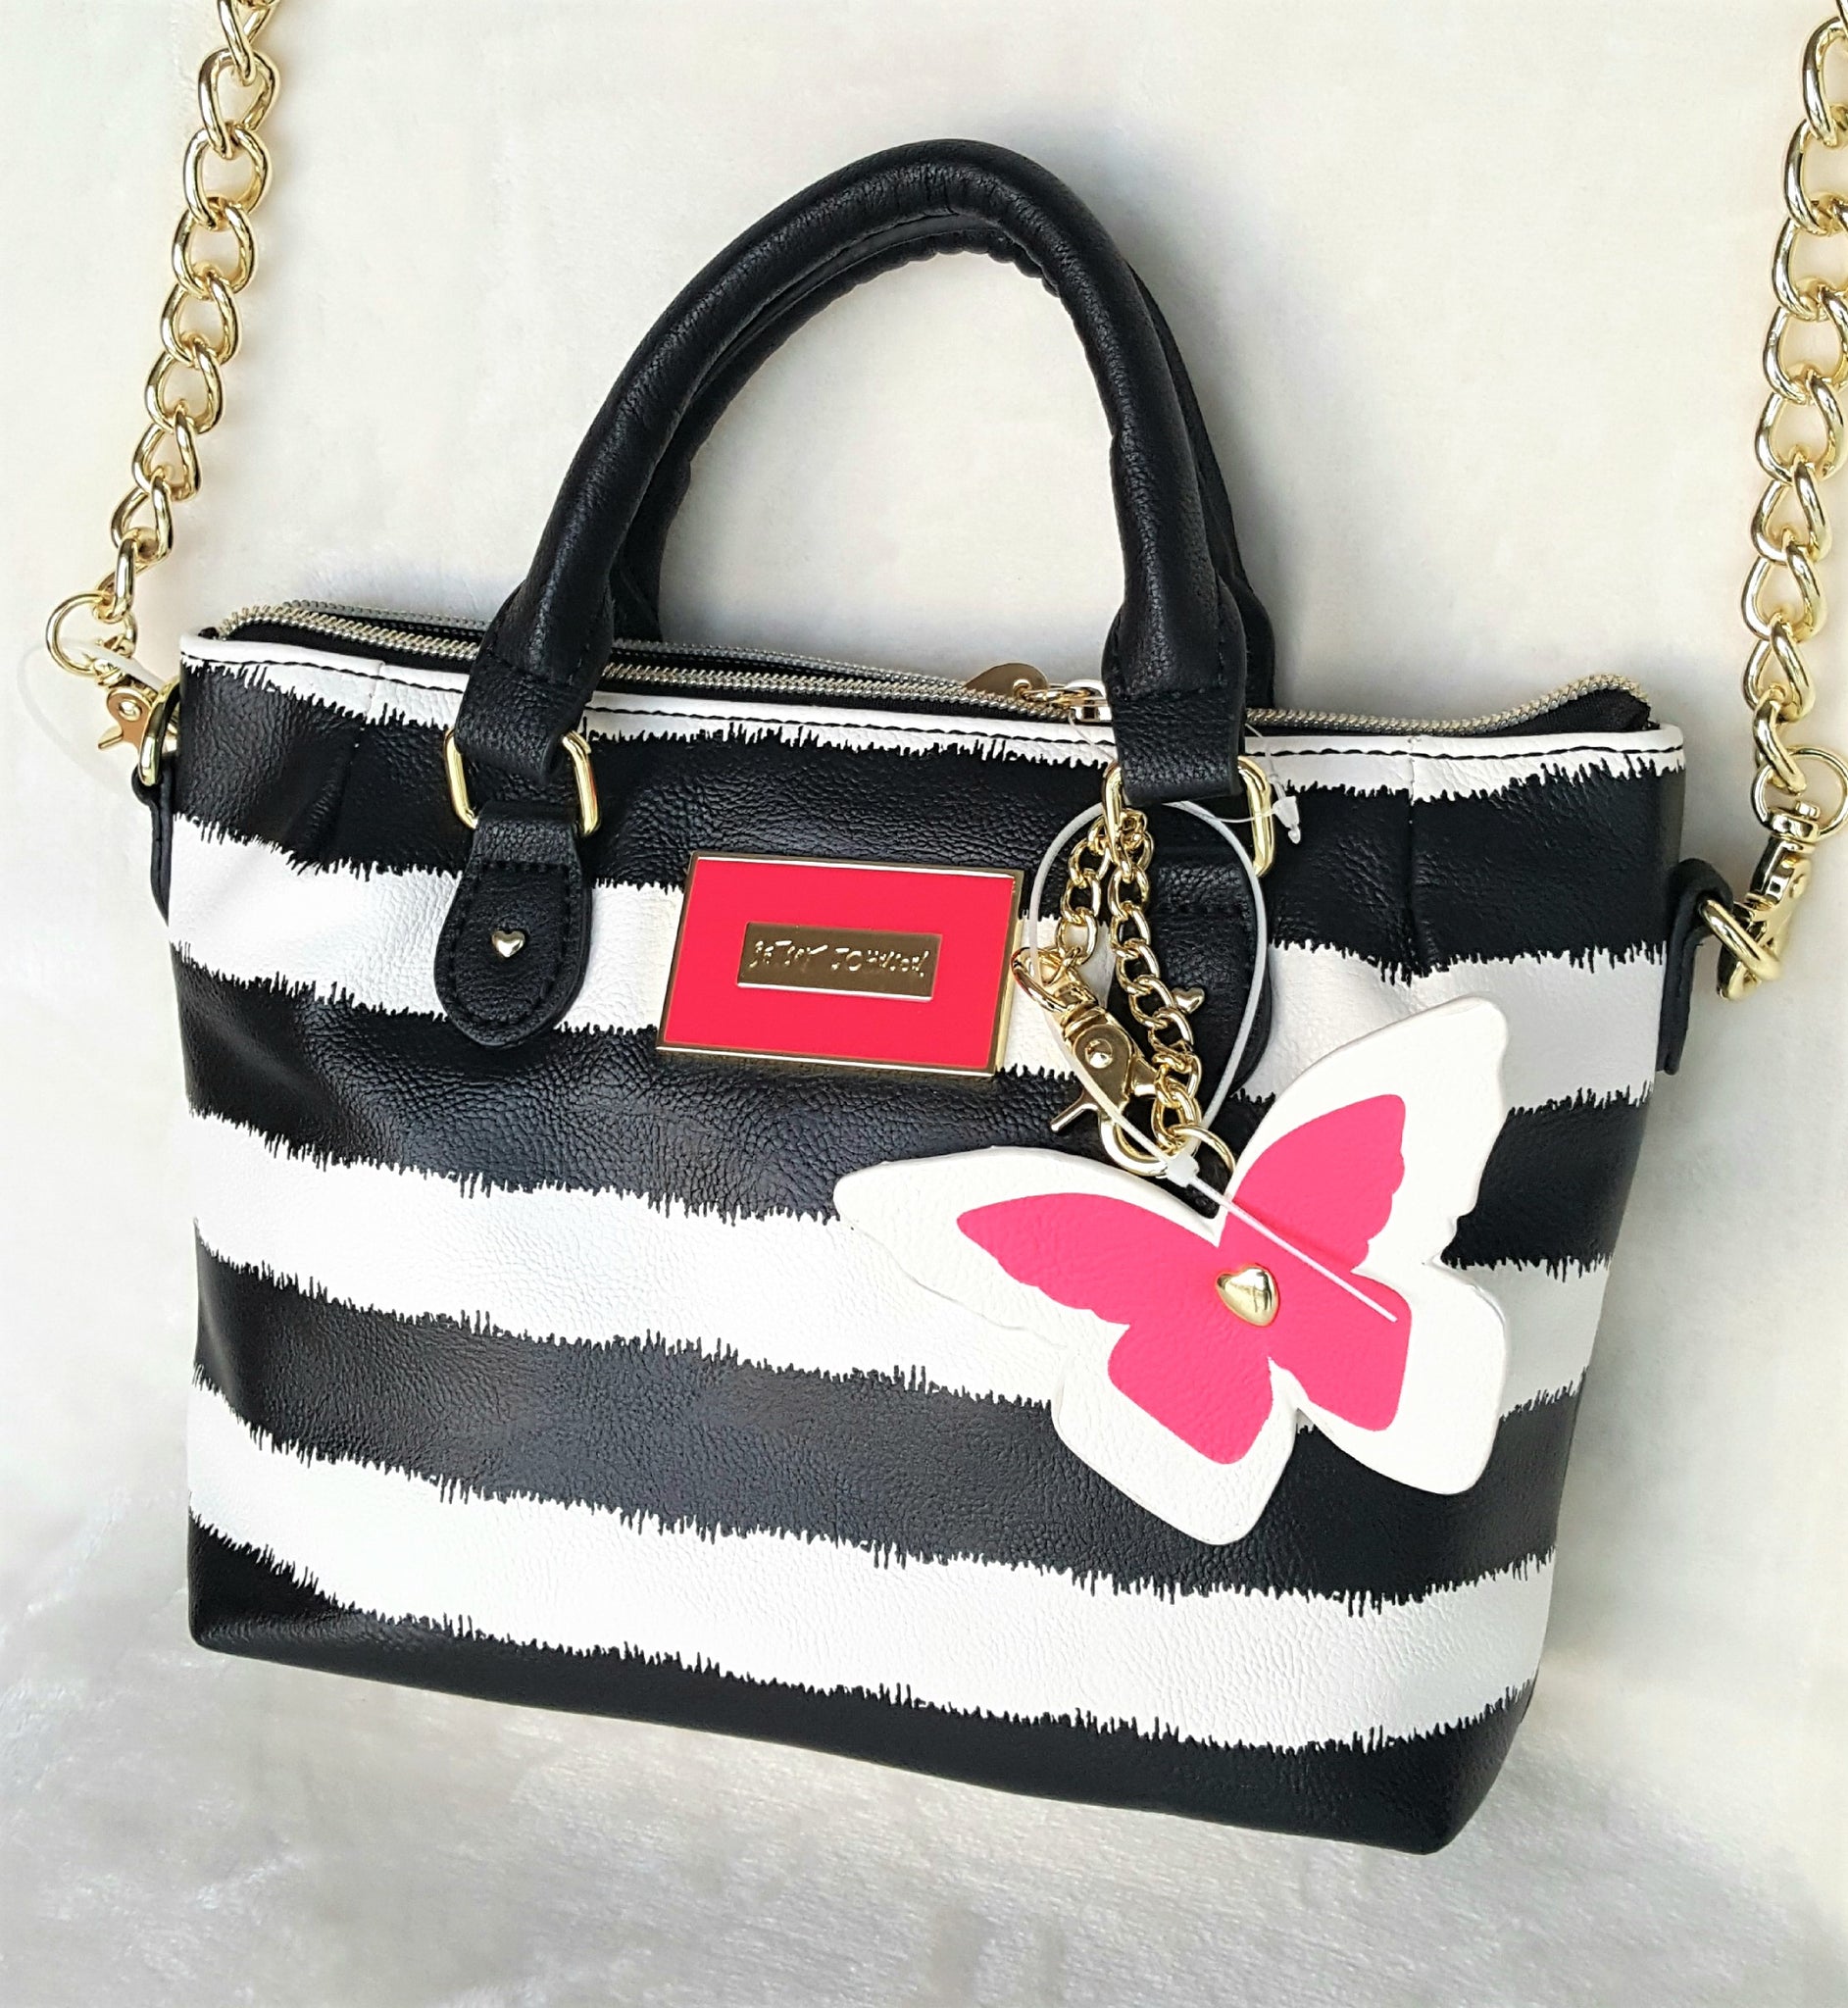 Betsey Johnson Bag Purse Wallet for sale in Los Angeles, CA - 5miles: Buy  and Sell